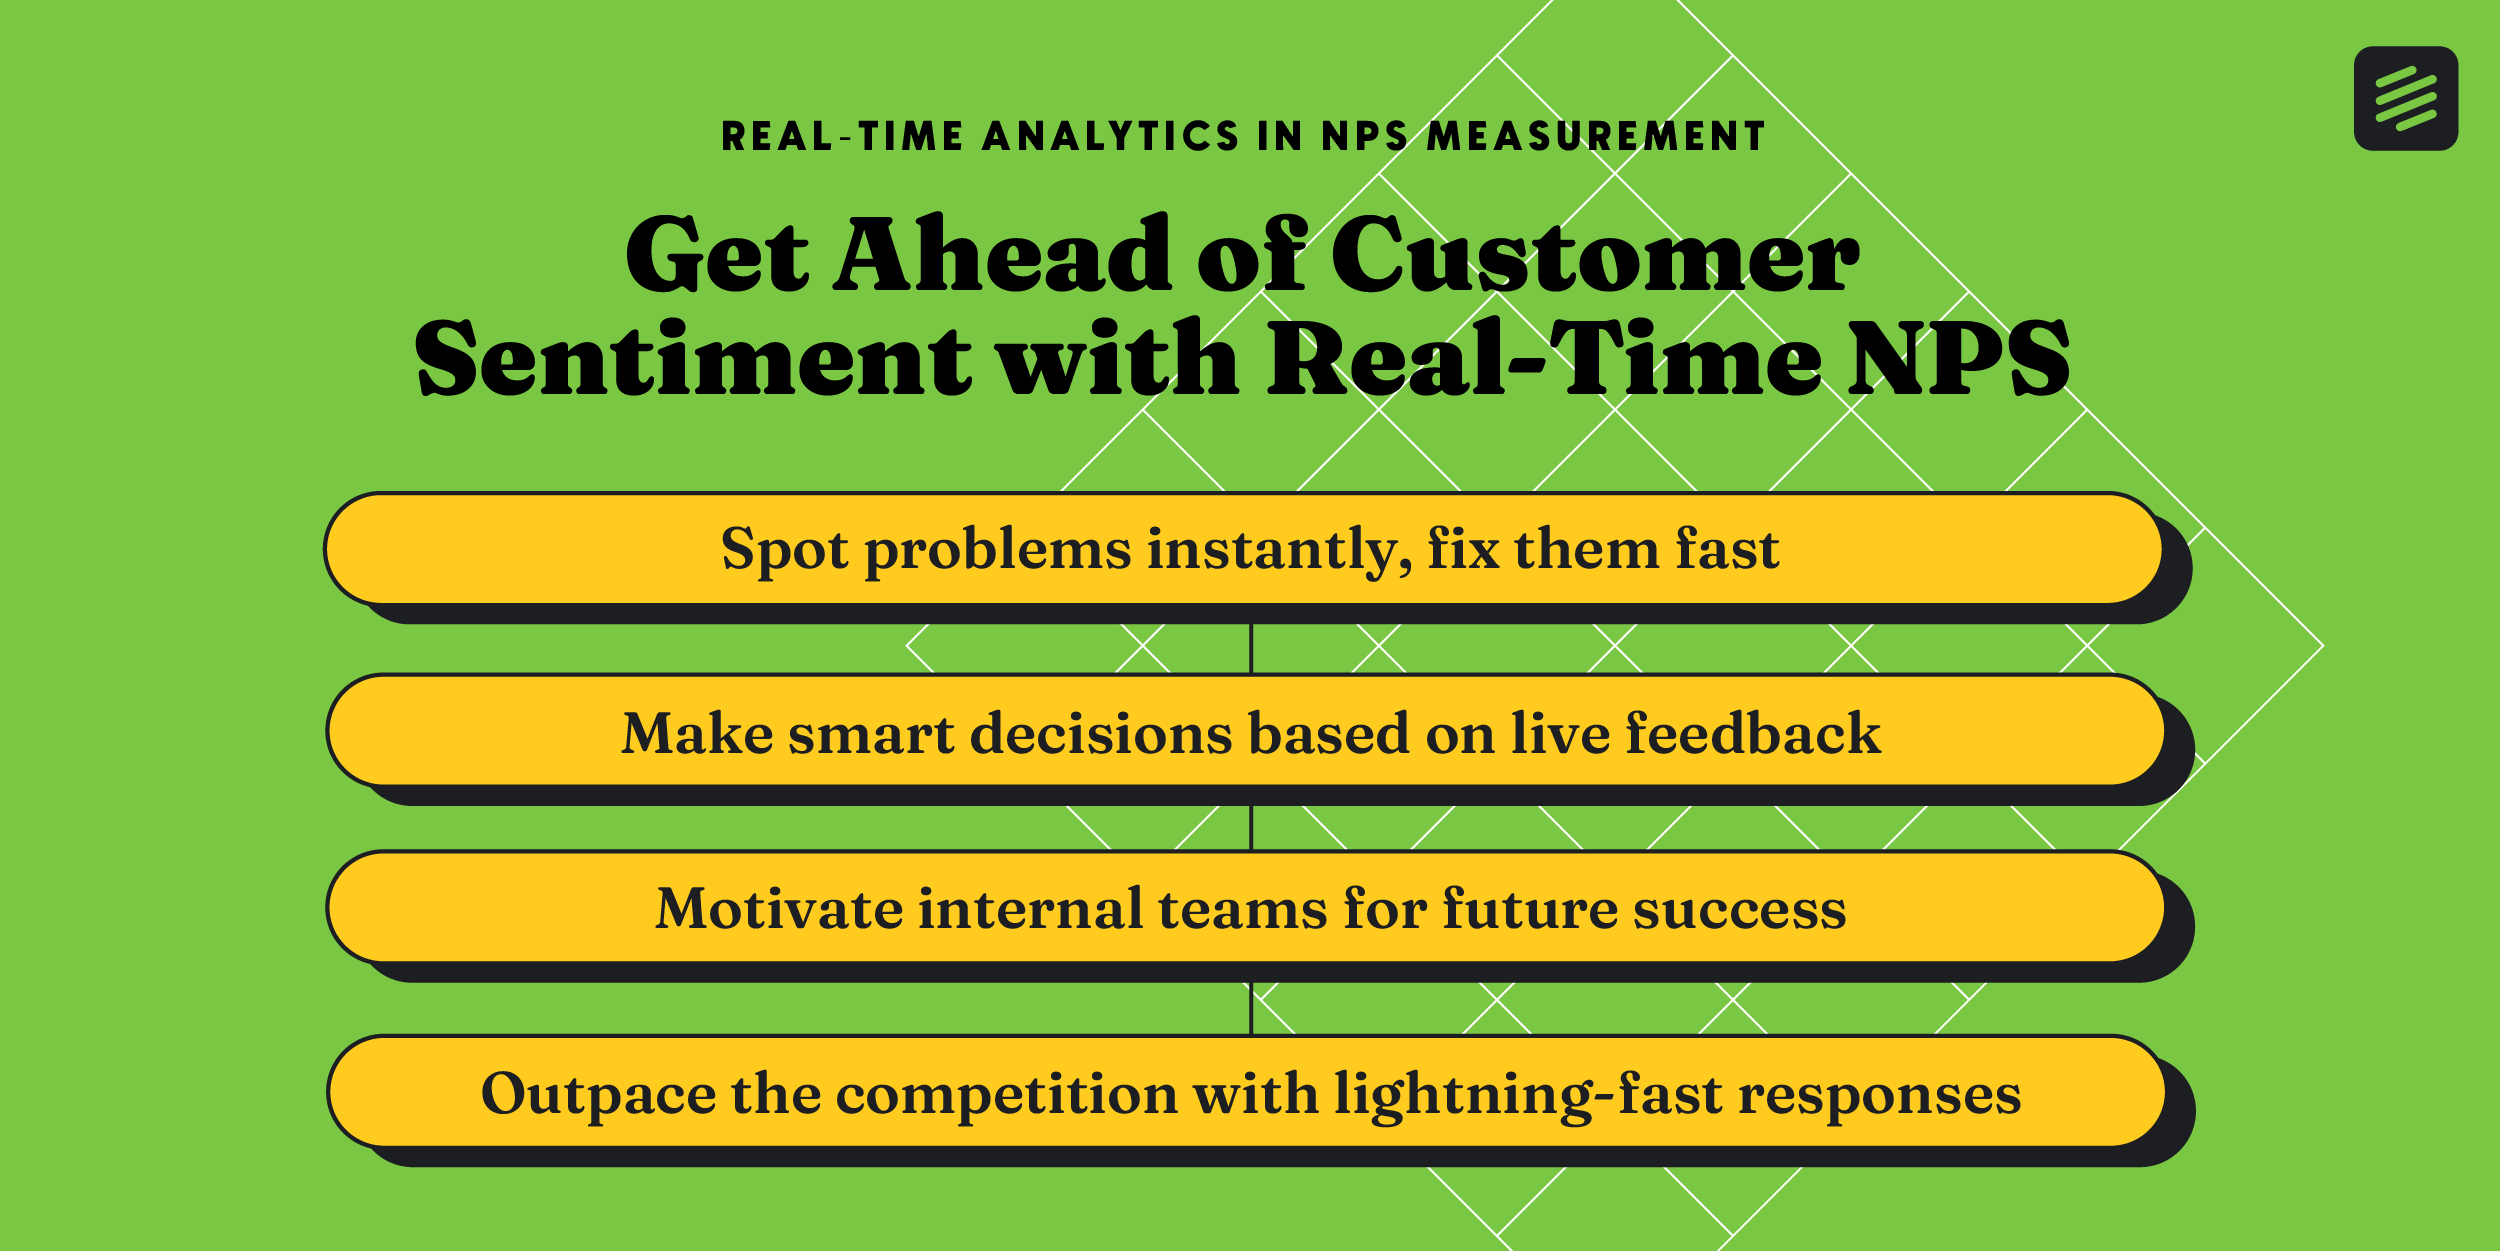 Get Ahead of Customer Sentiment with Real-Time NPS